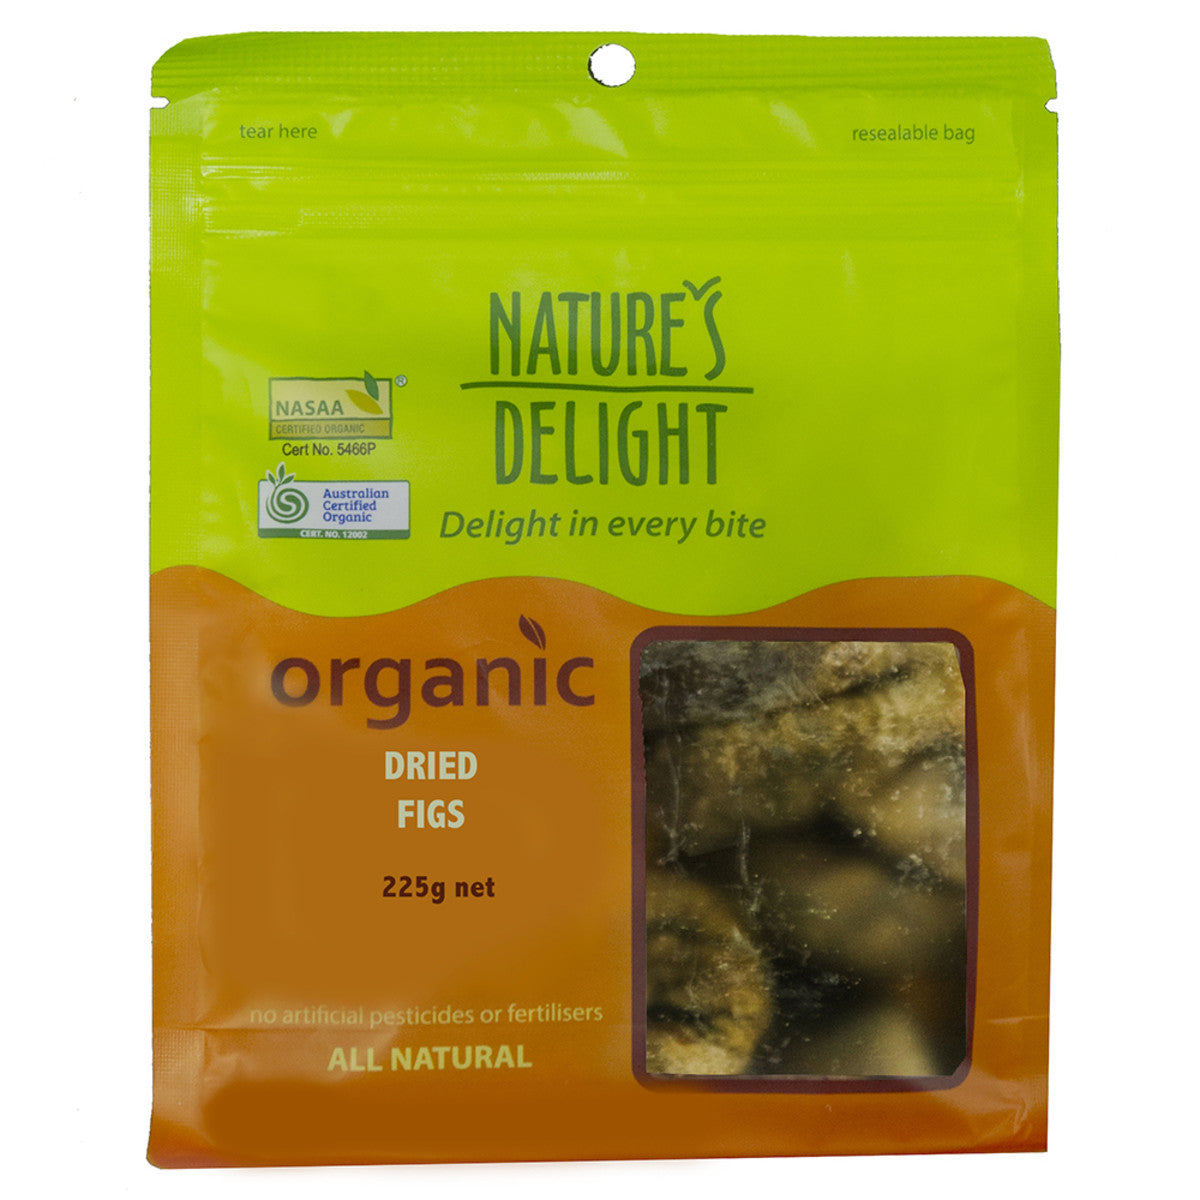 Natures Delight - Organic Dried Figs